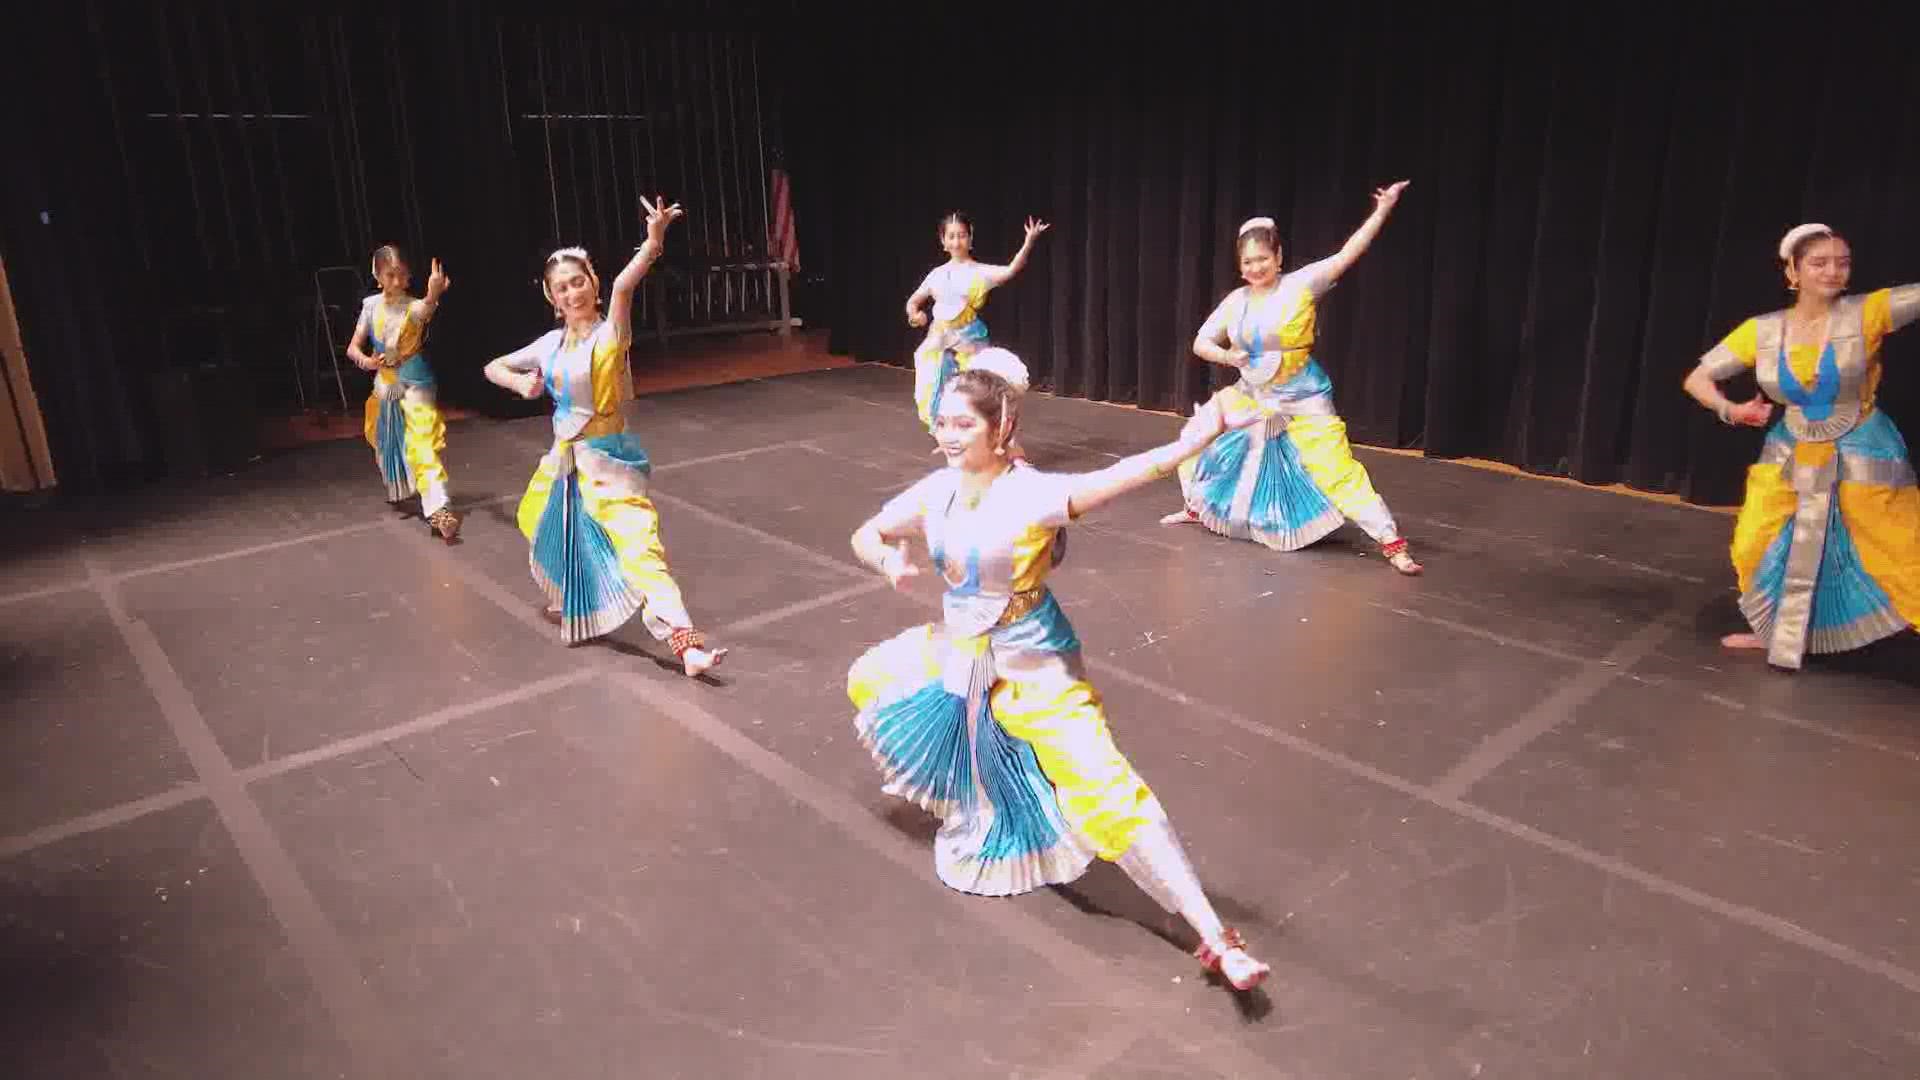 This is the 10th year that a special recital is being held, to not only share rich tradition and culture of Indian dance with the community, but also raise money.